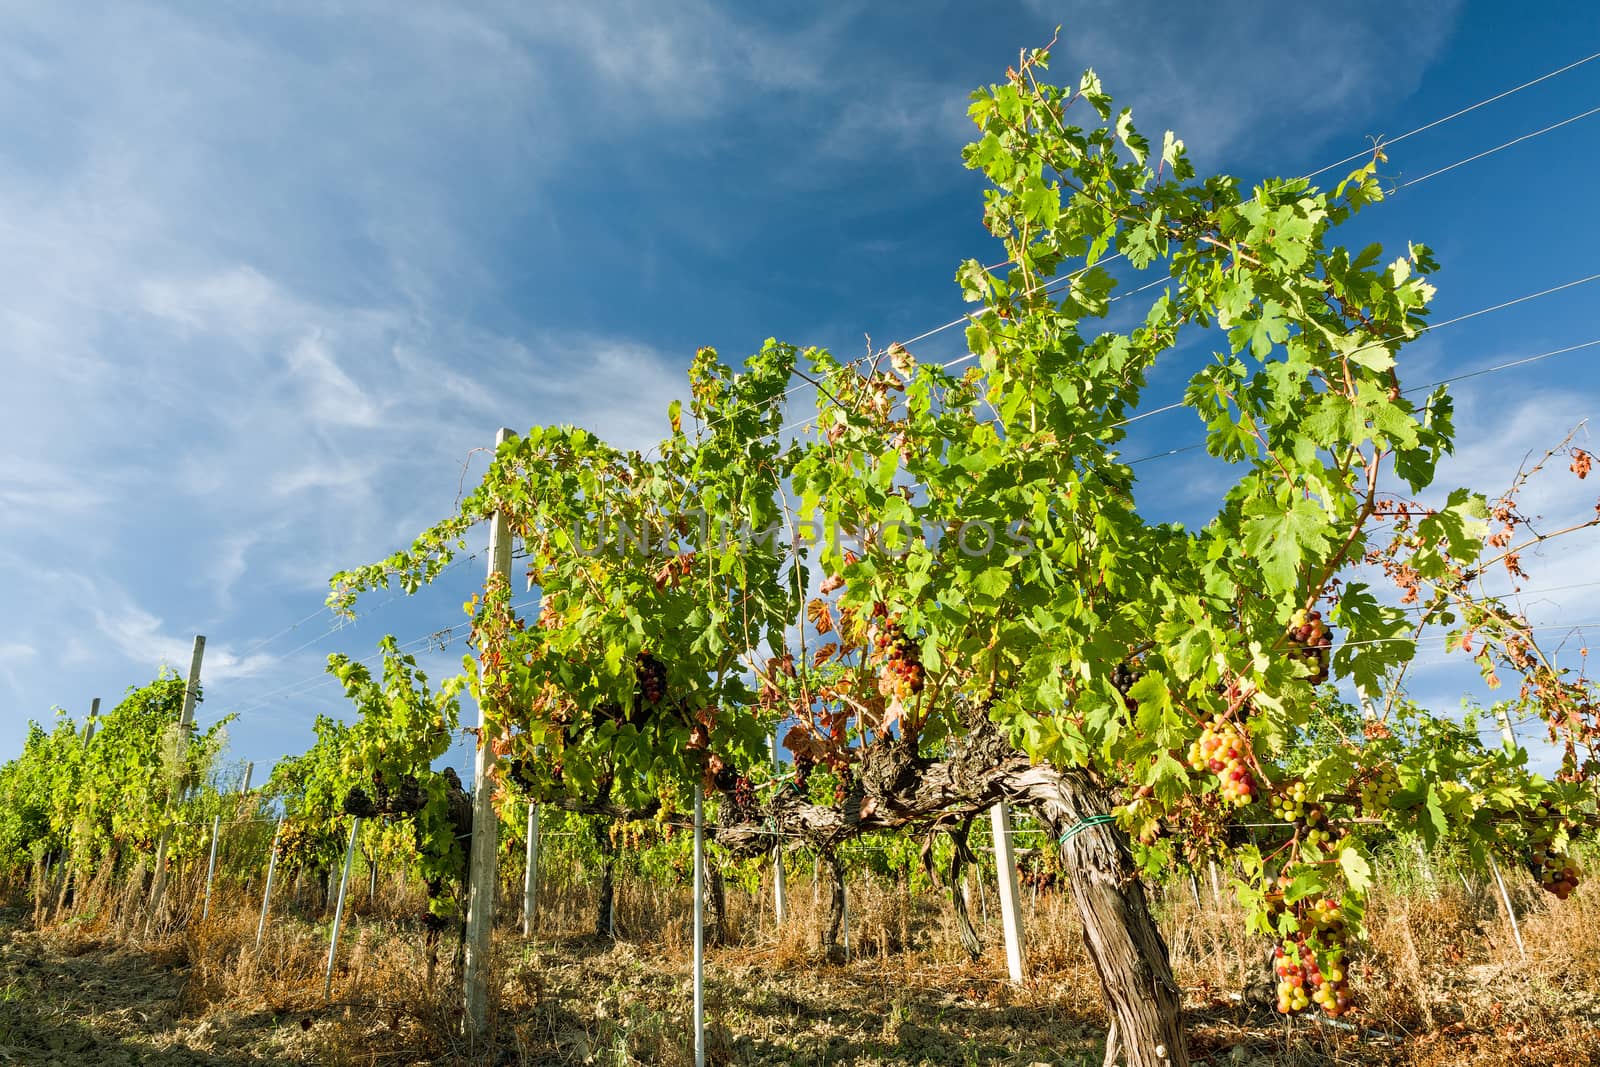 Colored grapes in the vineyard against a blue sky